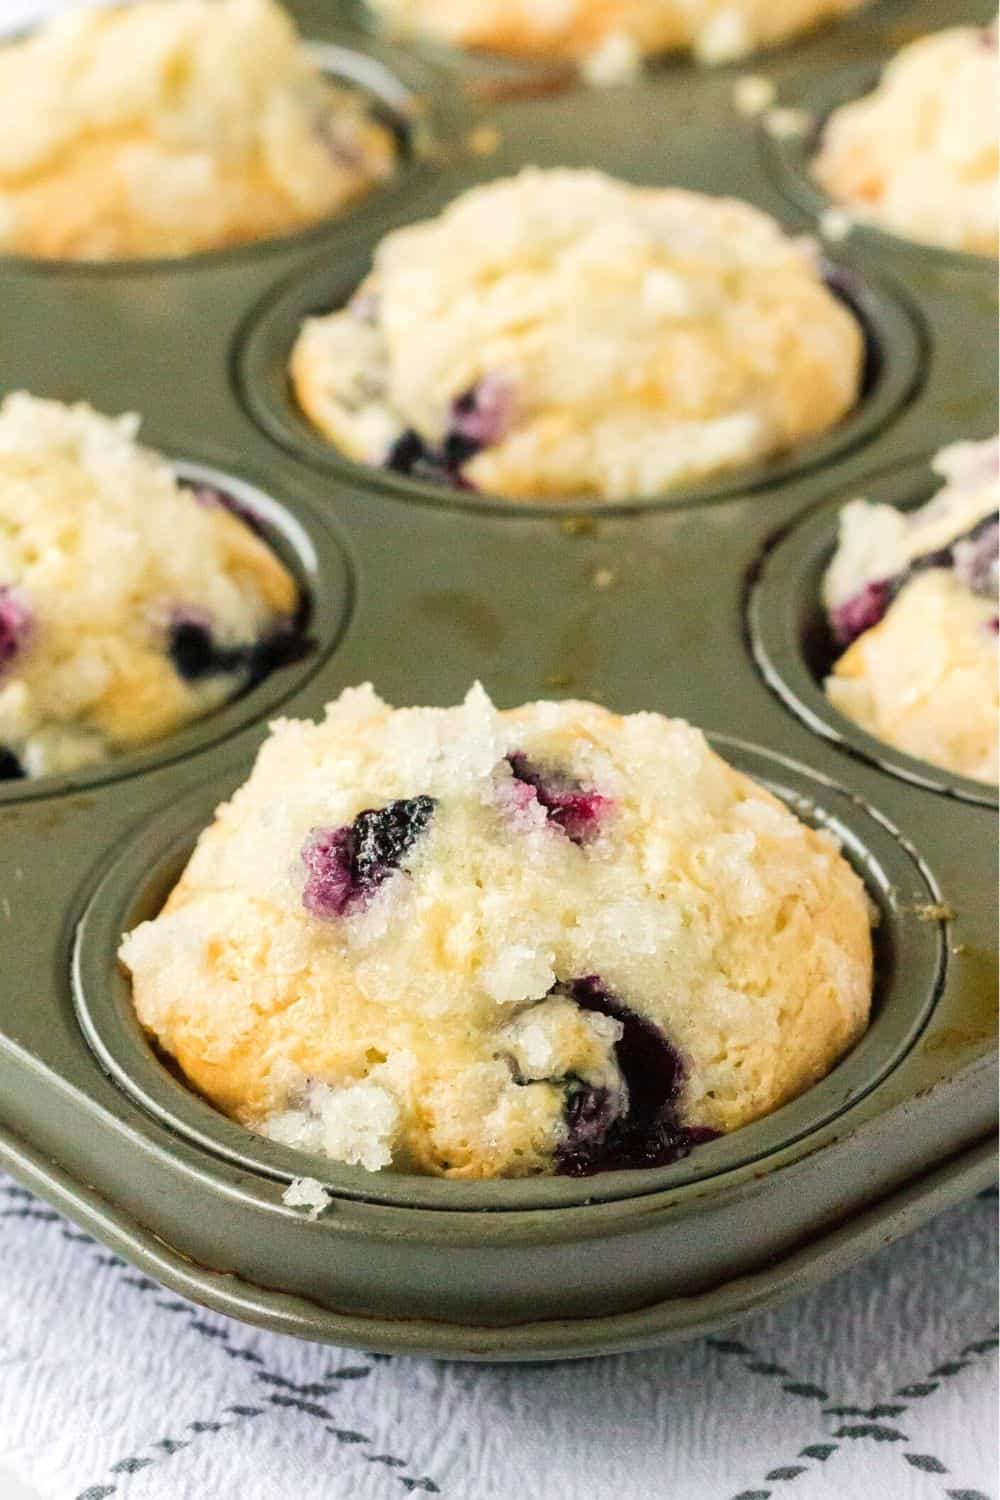 streusel-topped blueberry muffins made with Bisquick, freshly baked and still in the muffin pan.